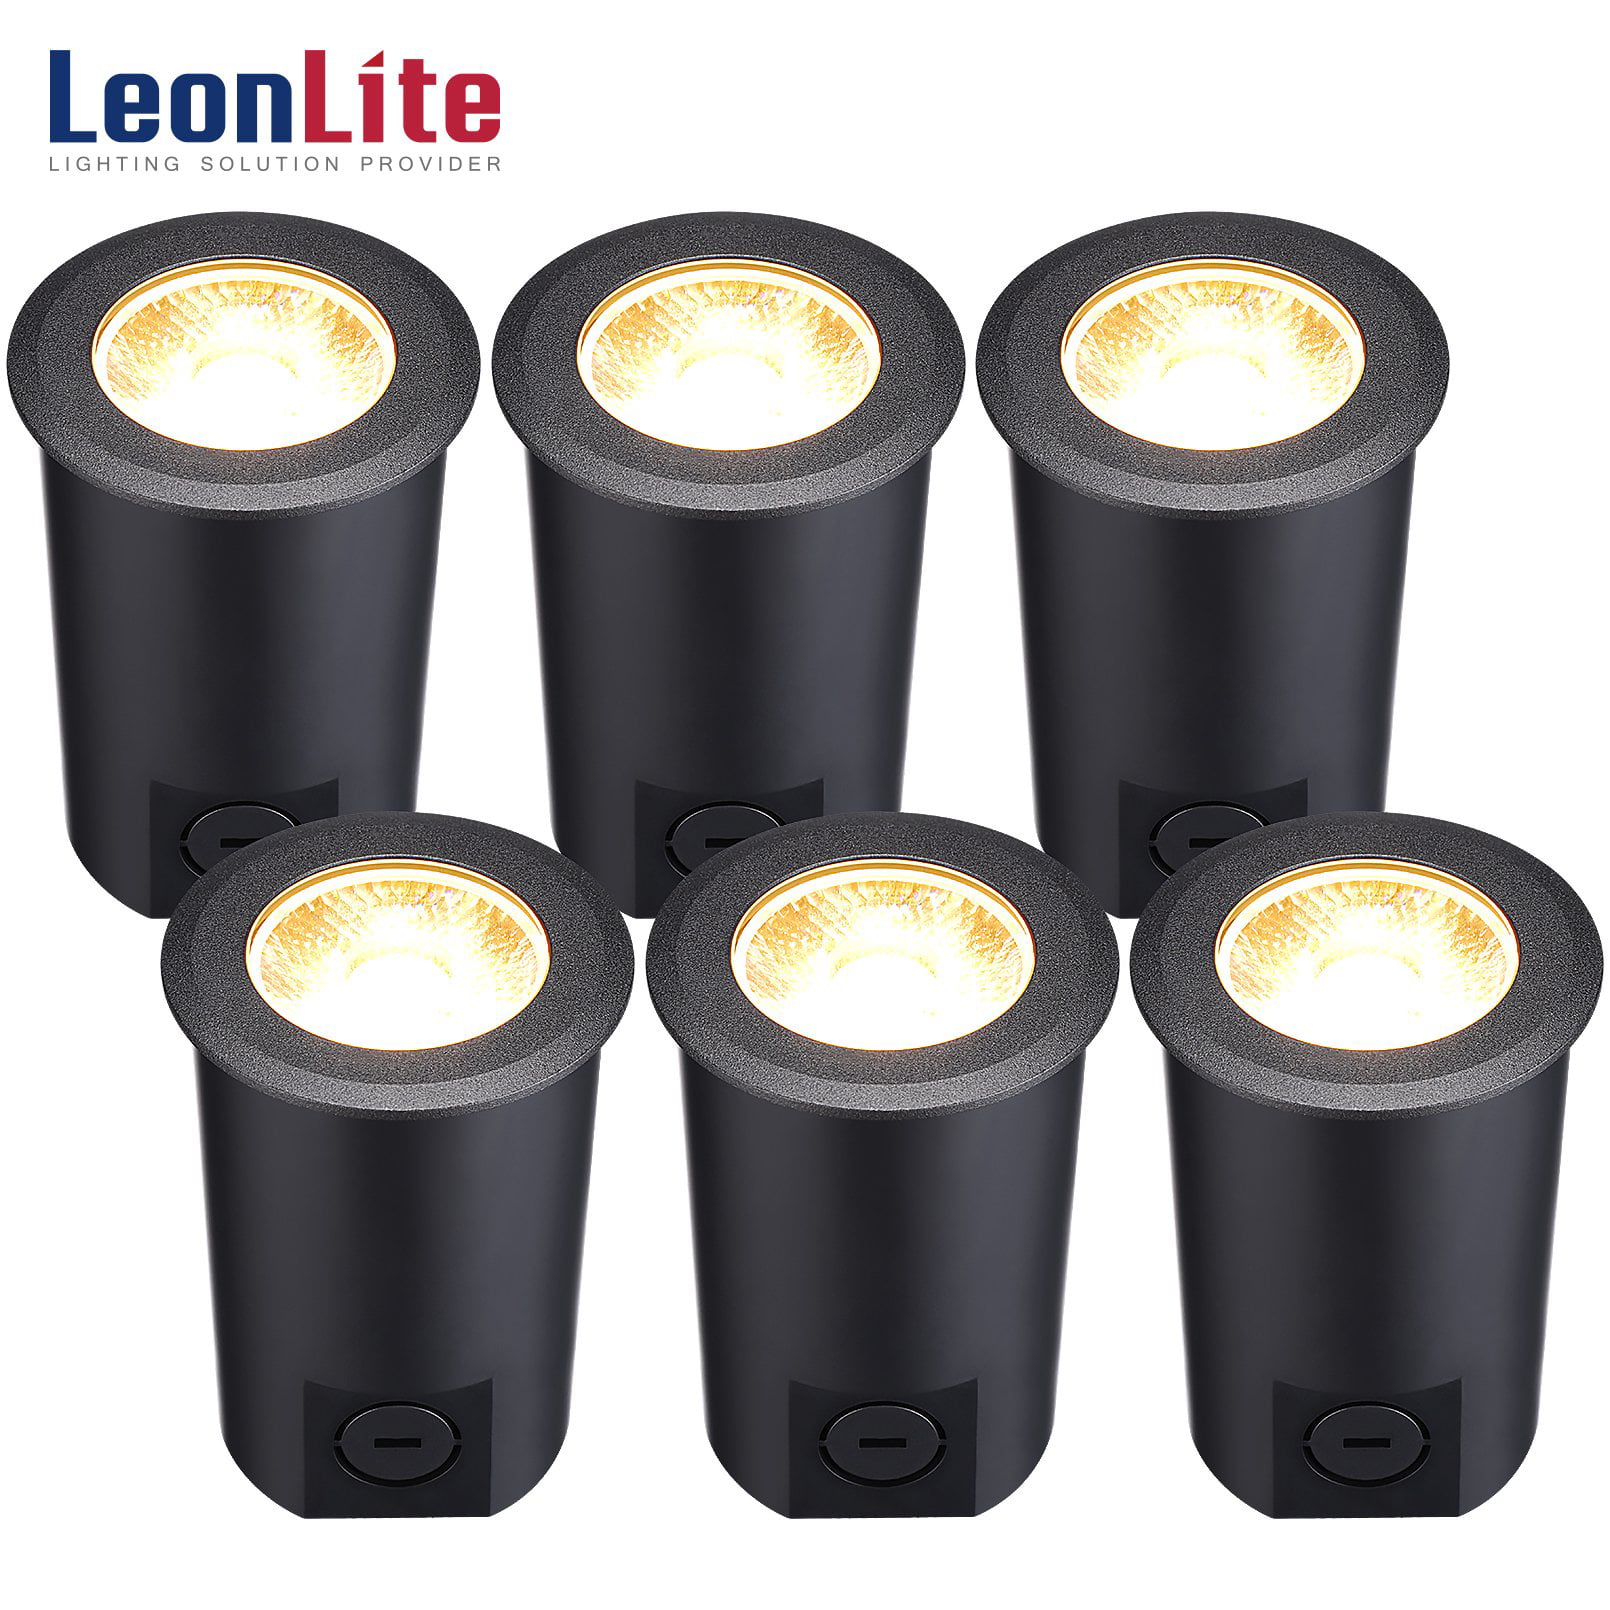 LEONLITE 12-Pack 3W Well Lights Landscape LED In Ground Outdoor